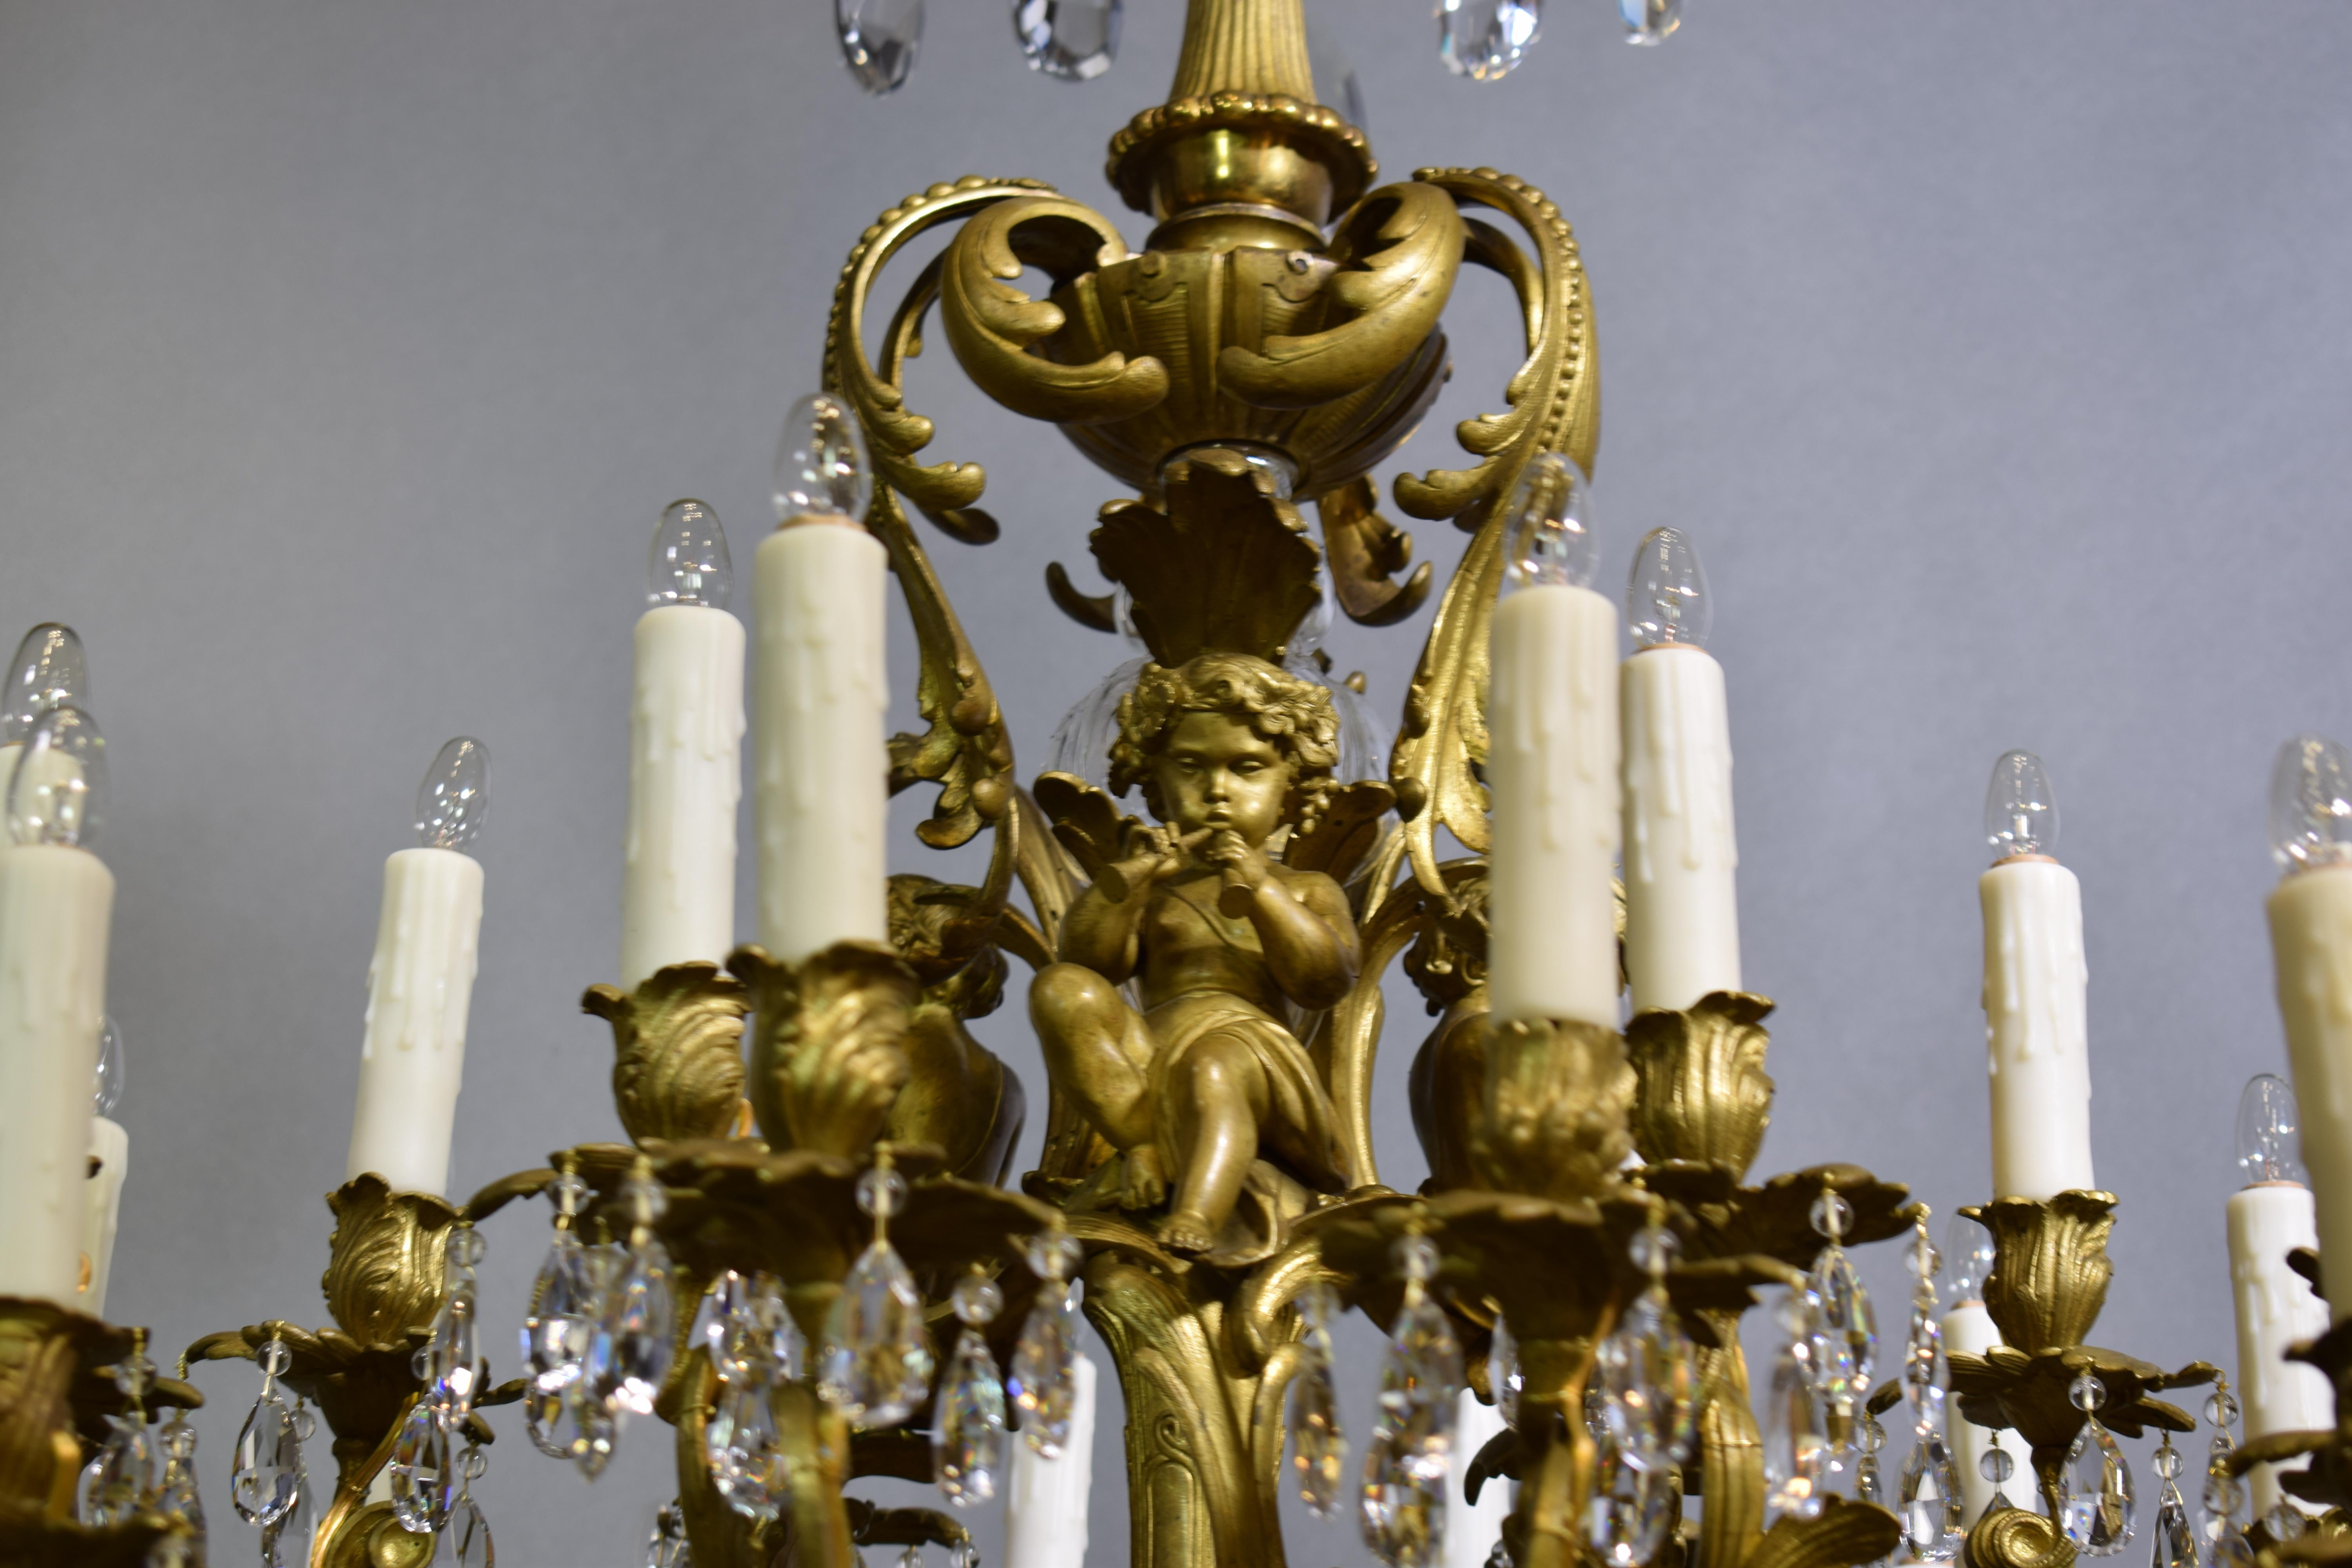 A very fine gilt bronze chandelier with crystal pendalogues, featuring cherubs playing different musical instruments, originally for candles now electrified. 24 lights. France, circa 1890.
Measures: 41